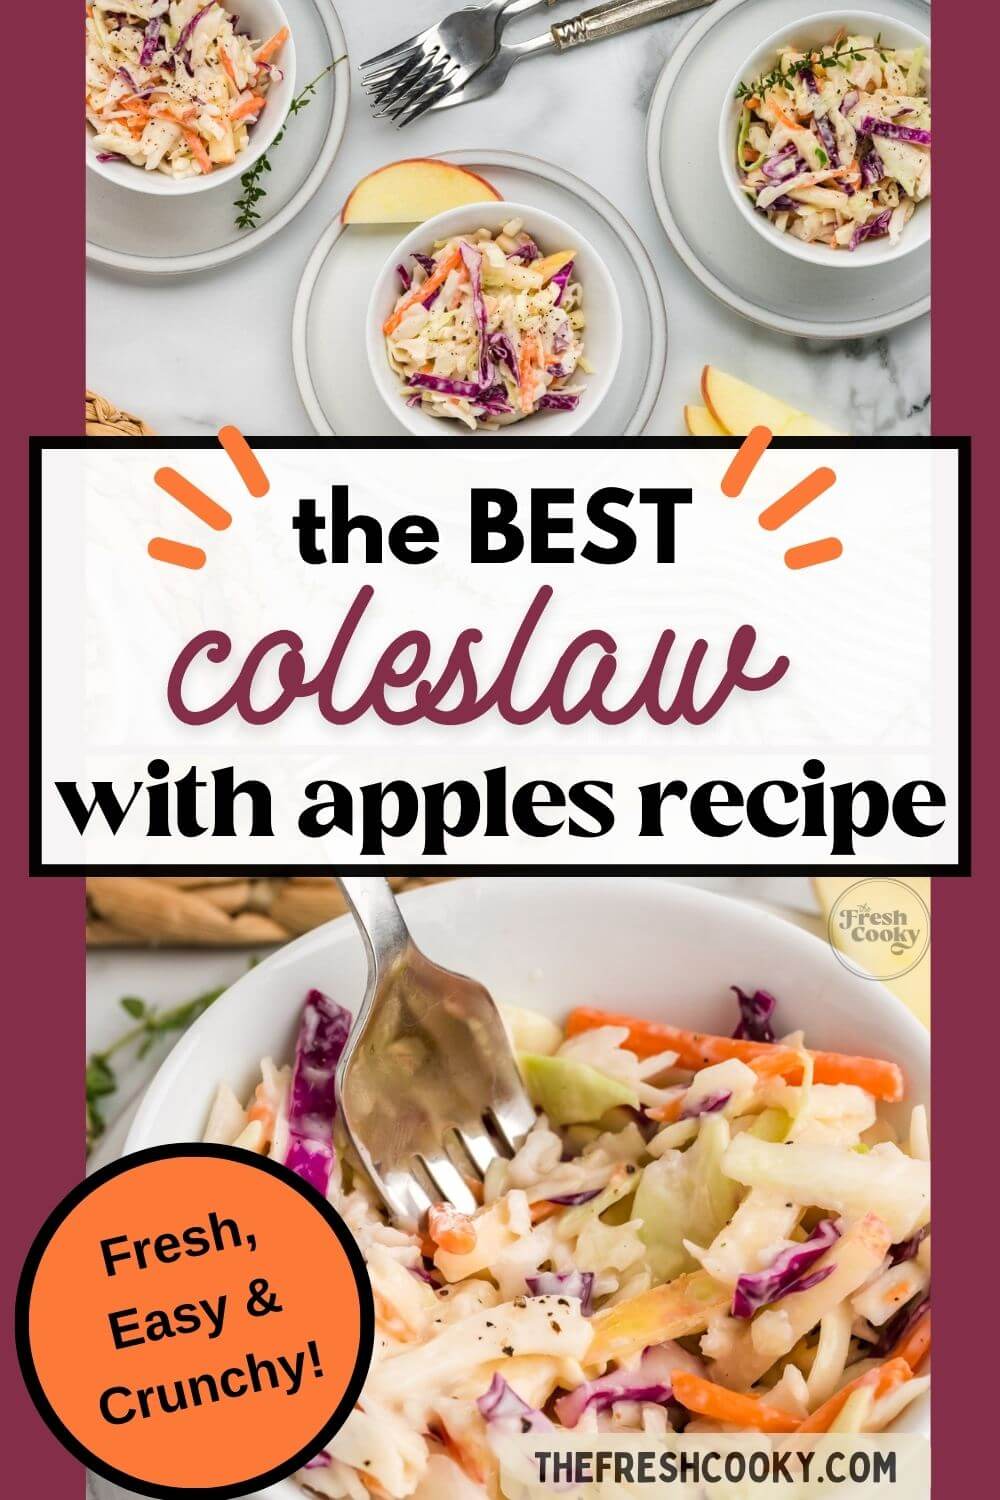 Multiple bowls of coleslaw are served along with apple slices, to pin.